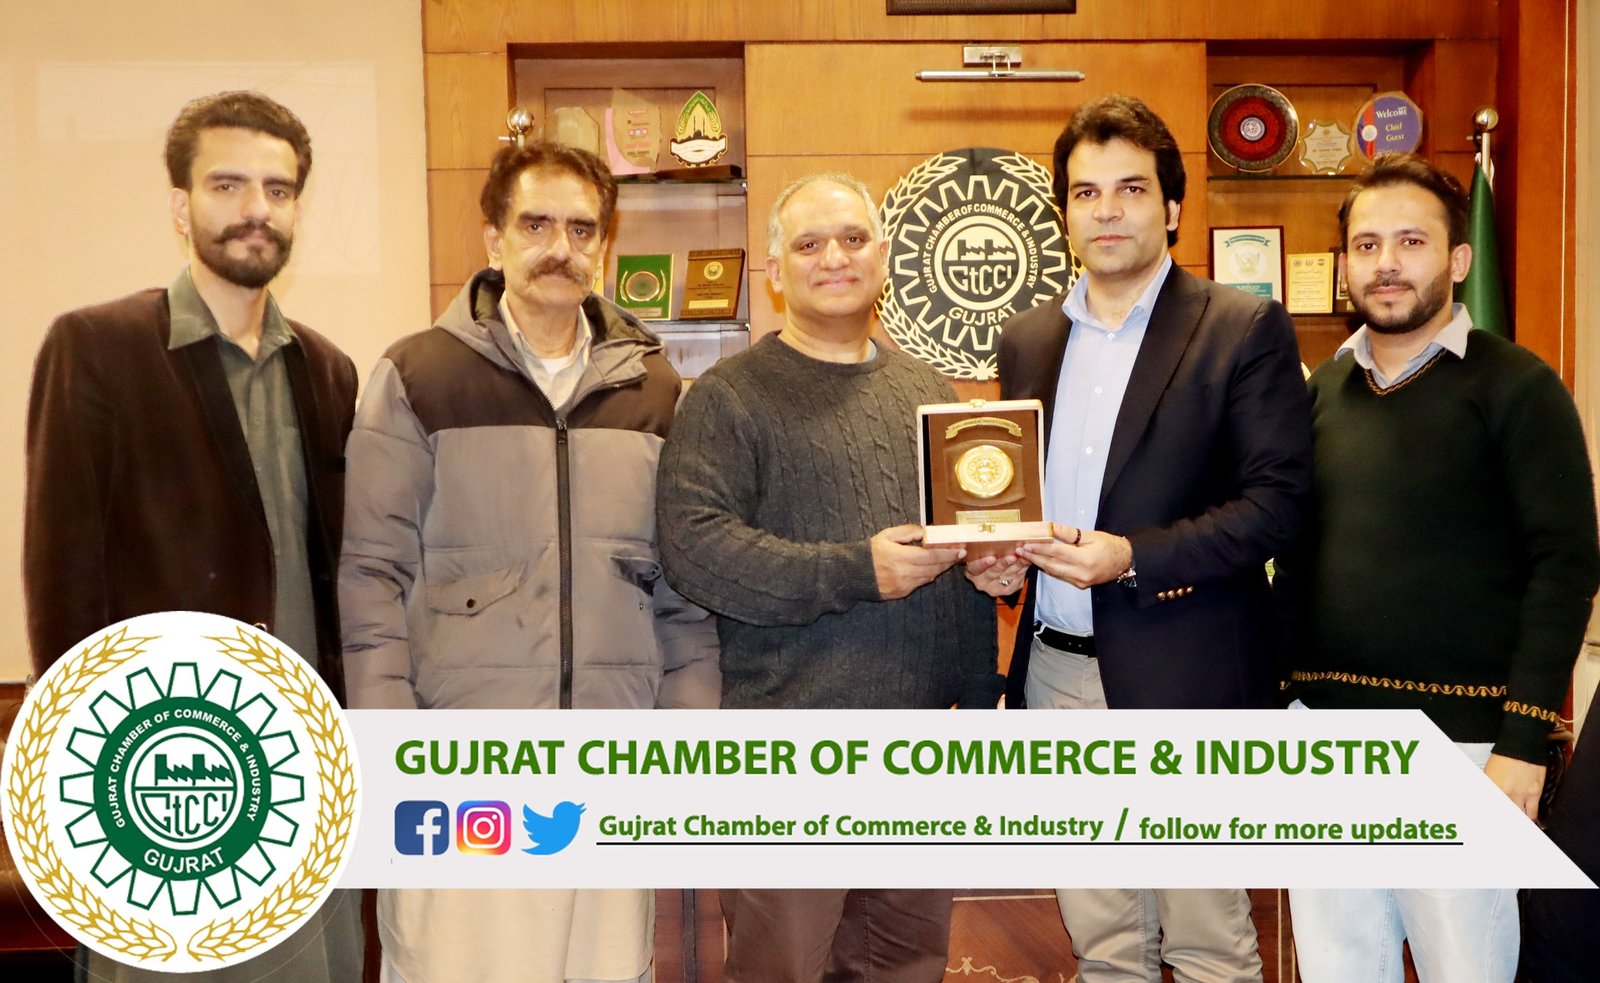 Mr. Aftab Moman #ITProgram #Manager, #DigitalBanking #LloydsBankingGroup, #London, Mr. Asad Ch, and Mr. Ali Ch #visited #GujratCahmberofCommerceandIndustry. Mr. Sikander Ishfaq Razi #President #GtCCI along Mr. Muhammad Usman Khalid #AdditionalSecretary gave them a tour of #GujratChamber of Commerce & Industry, showed them different #departments of #GujratChamber and also elaborated  them the working of #GujratChamber.